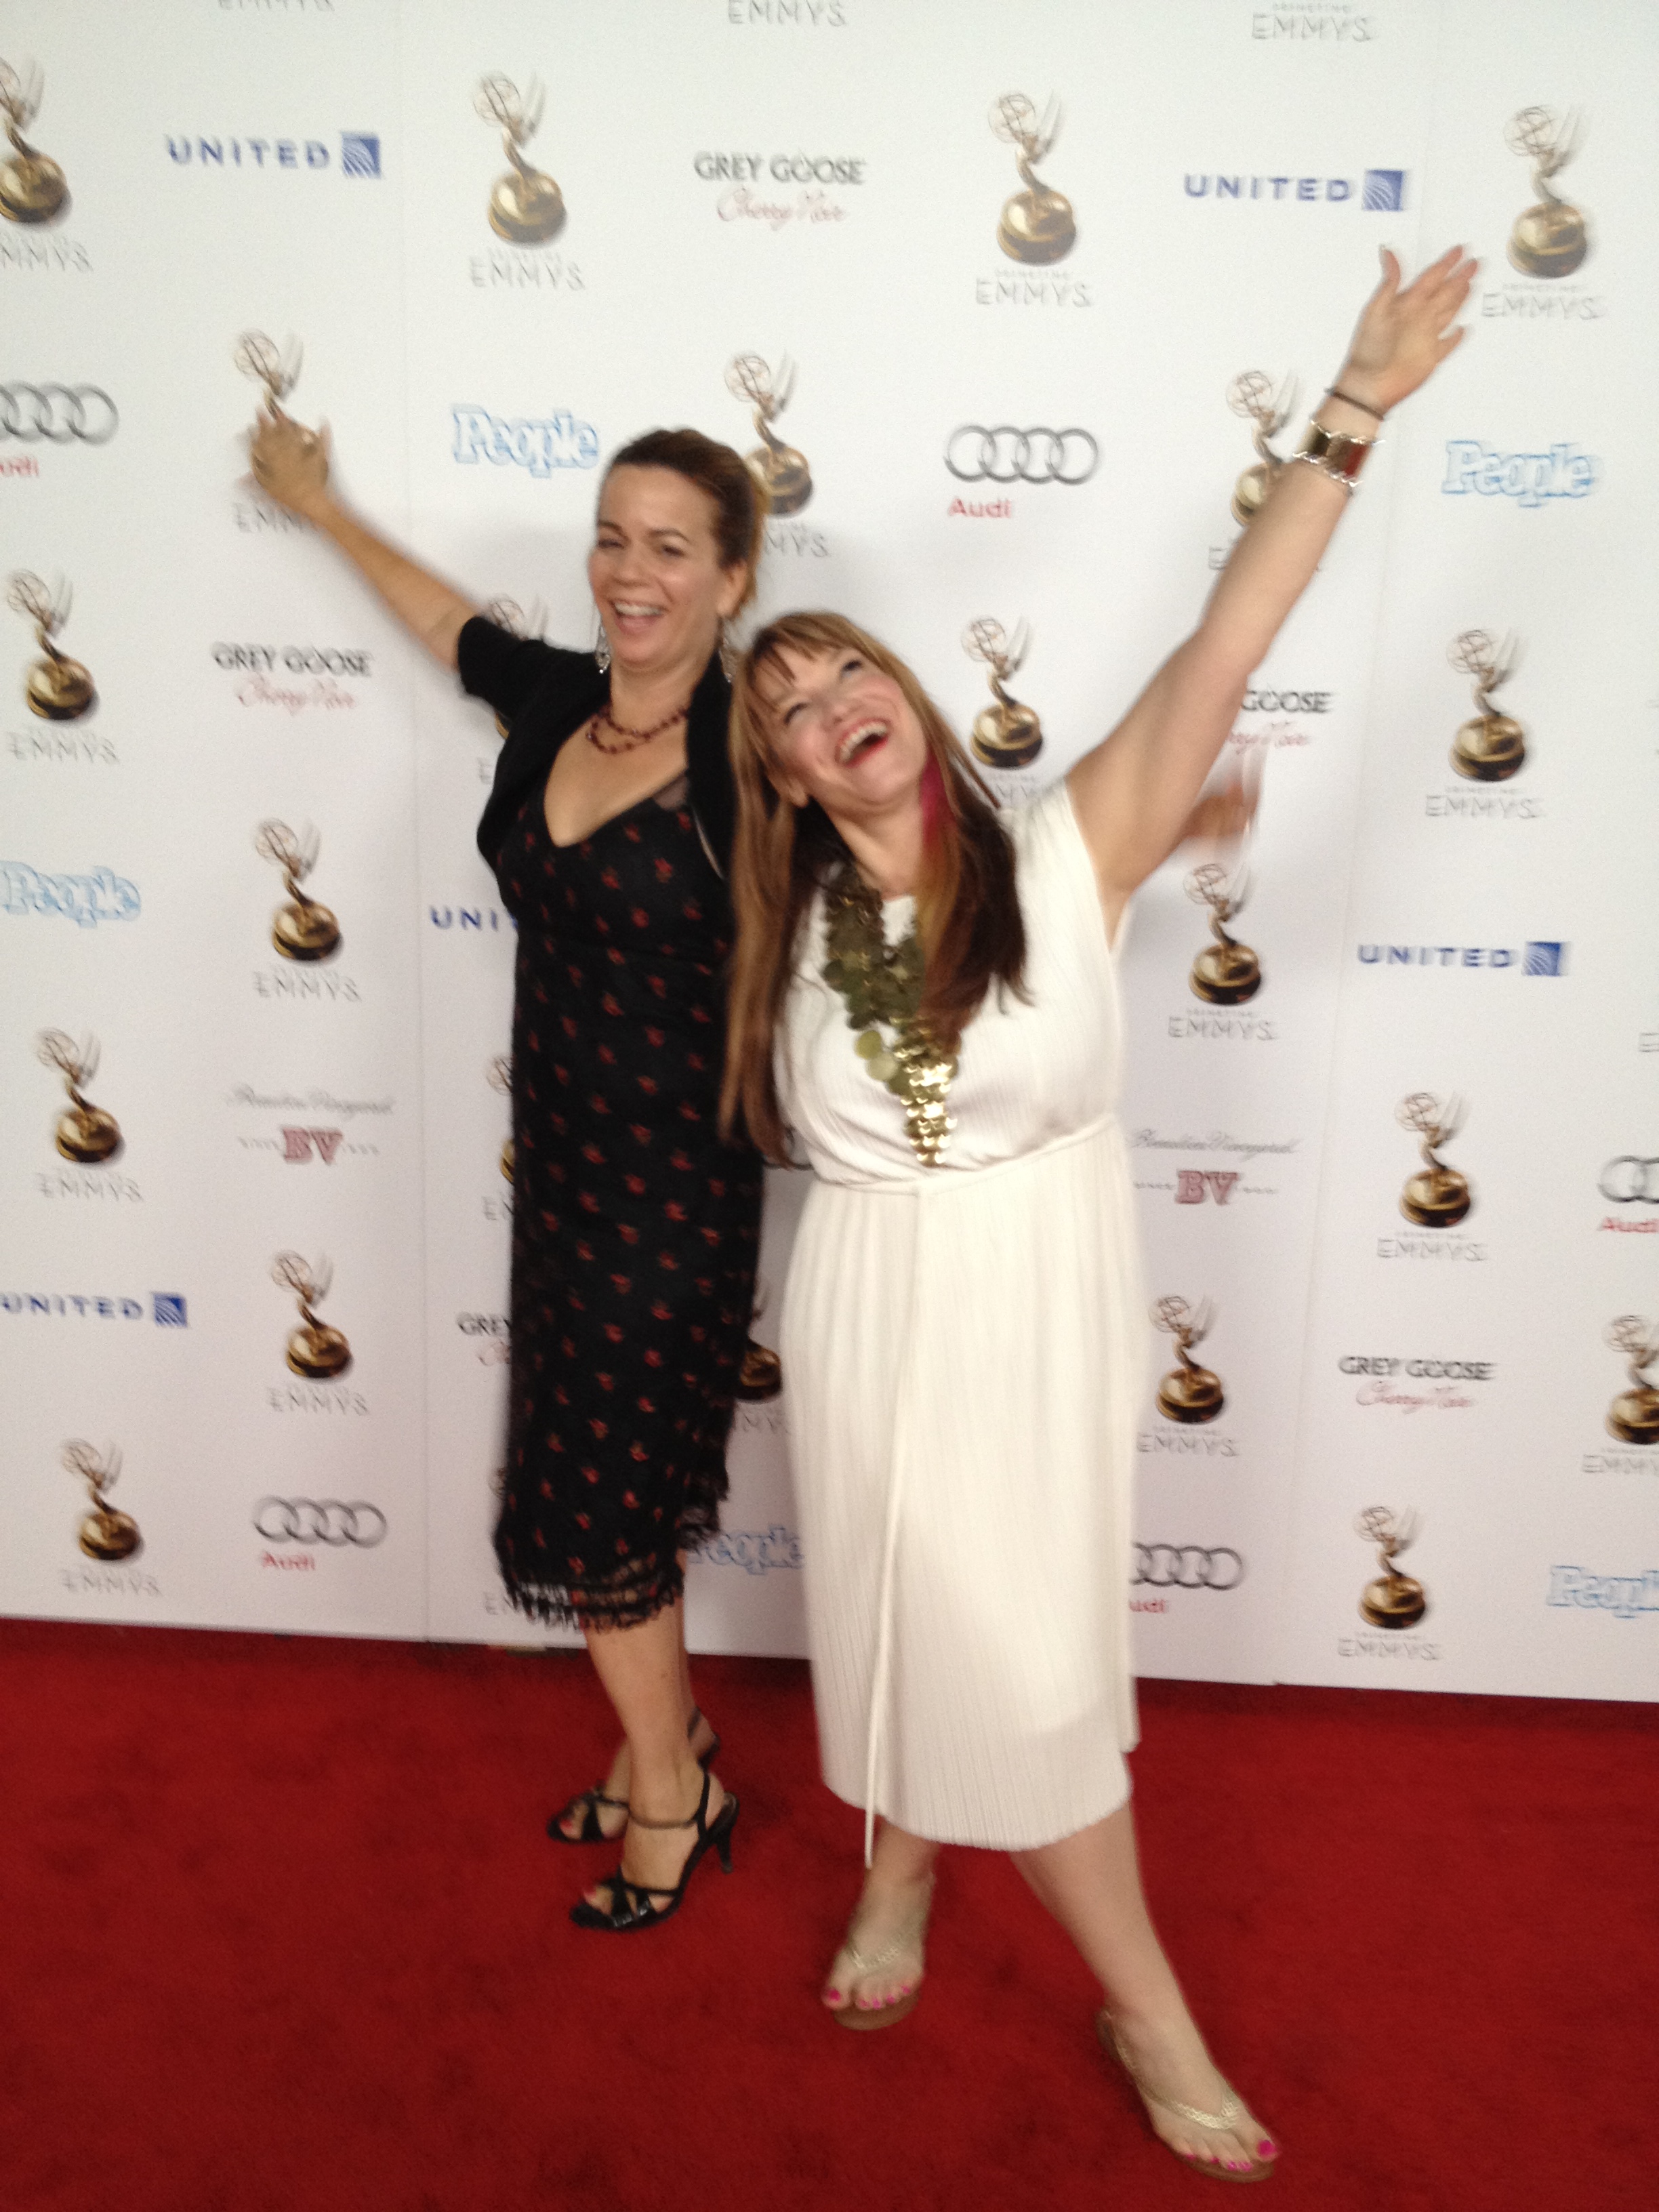 Amber J. Lawson & Lori H Schwartz ATAS IMPG governor @ the 2012 Emmy's performers party